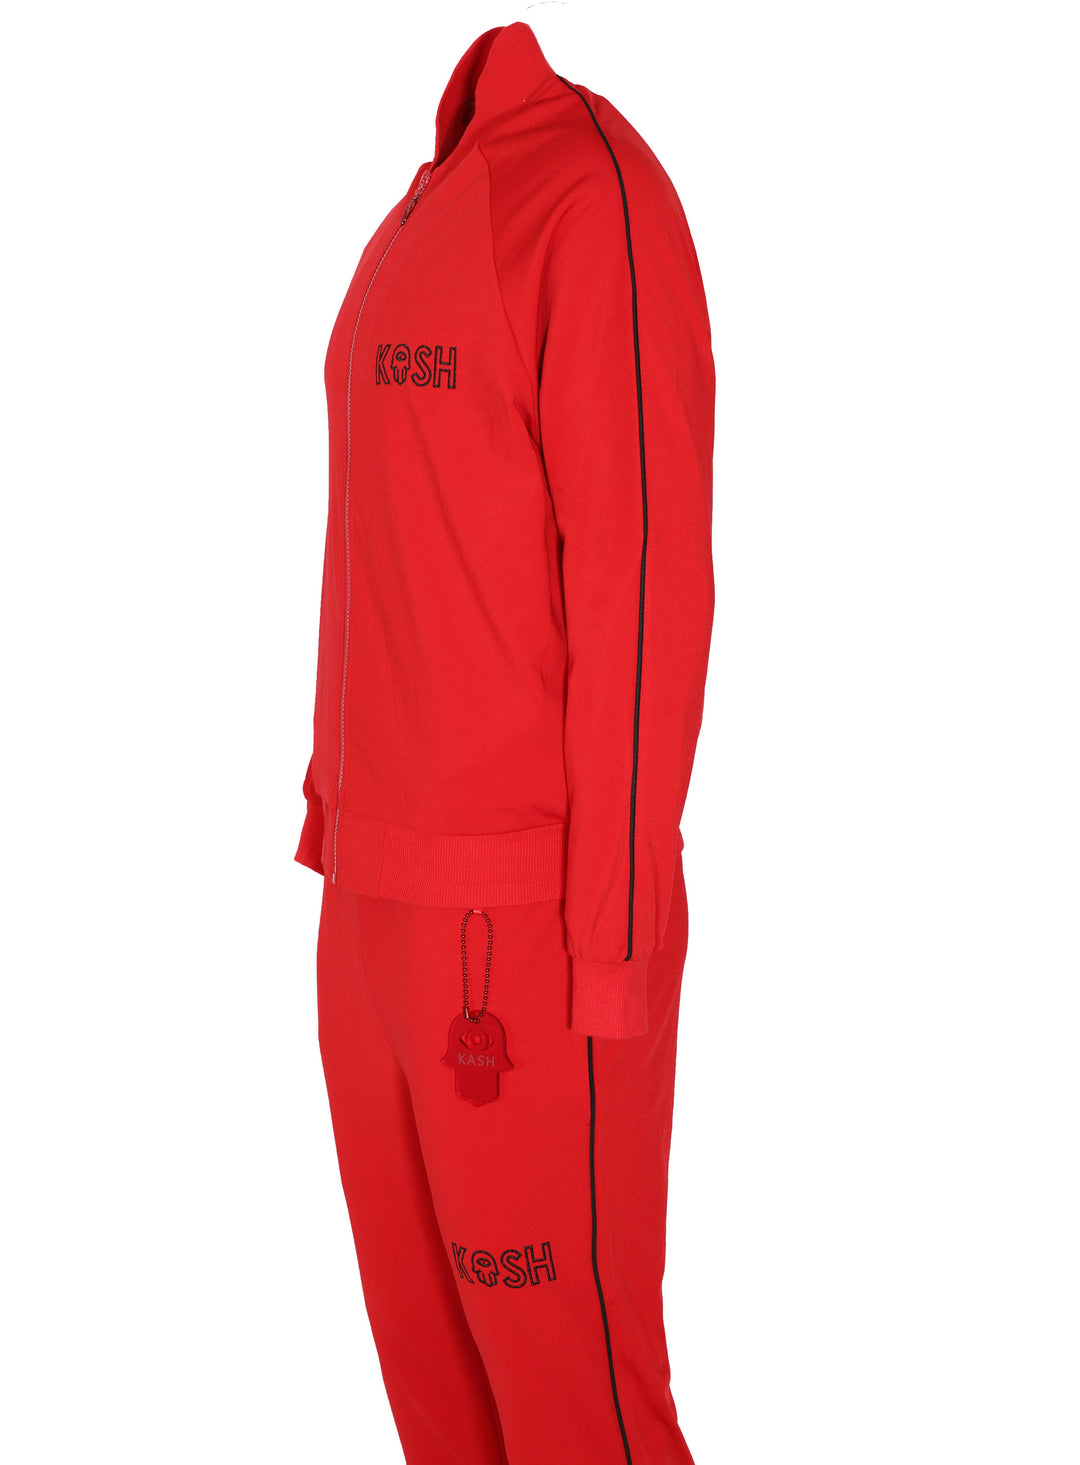 Kash Pipe Track Pants- Red